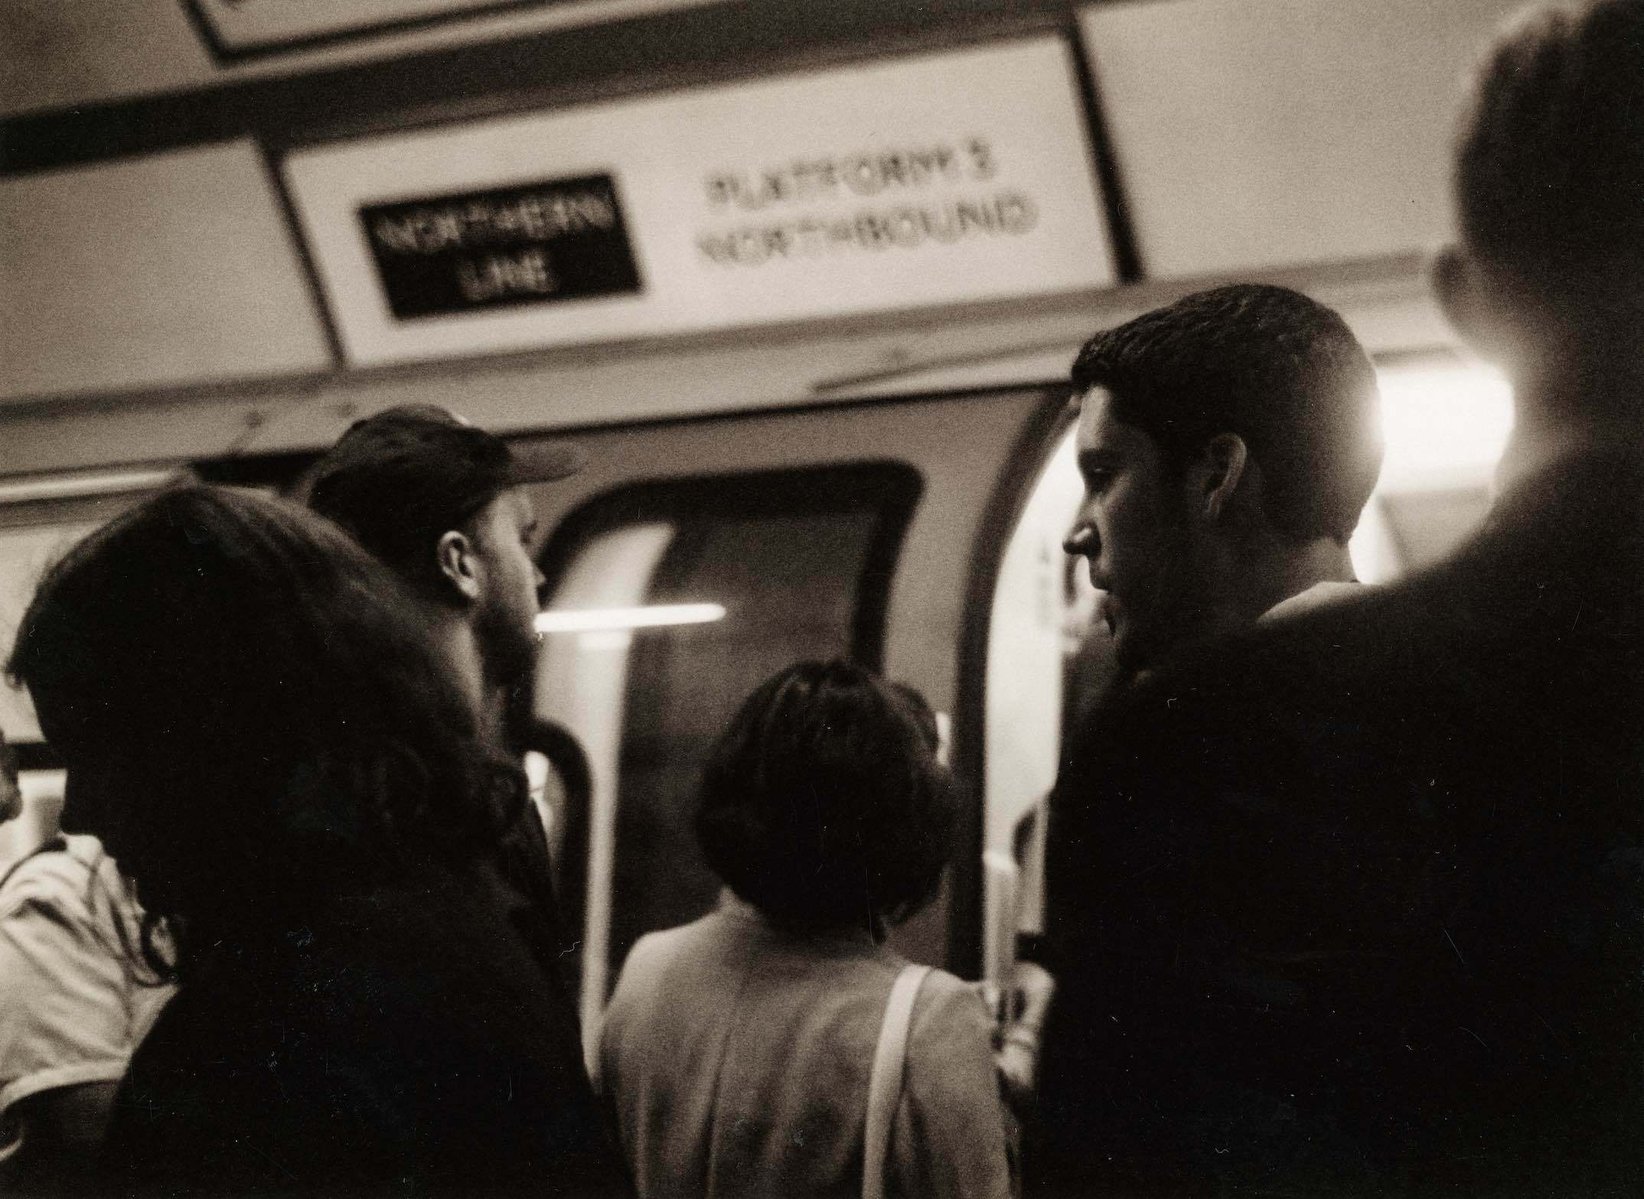 Black and white image of a group of people on a crowded platform at Tottenham Court Road Station, Northern Line, in August 2001.